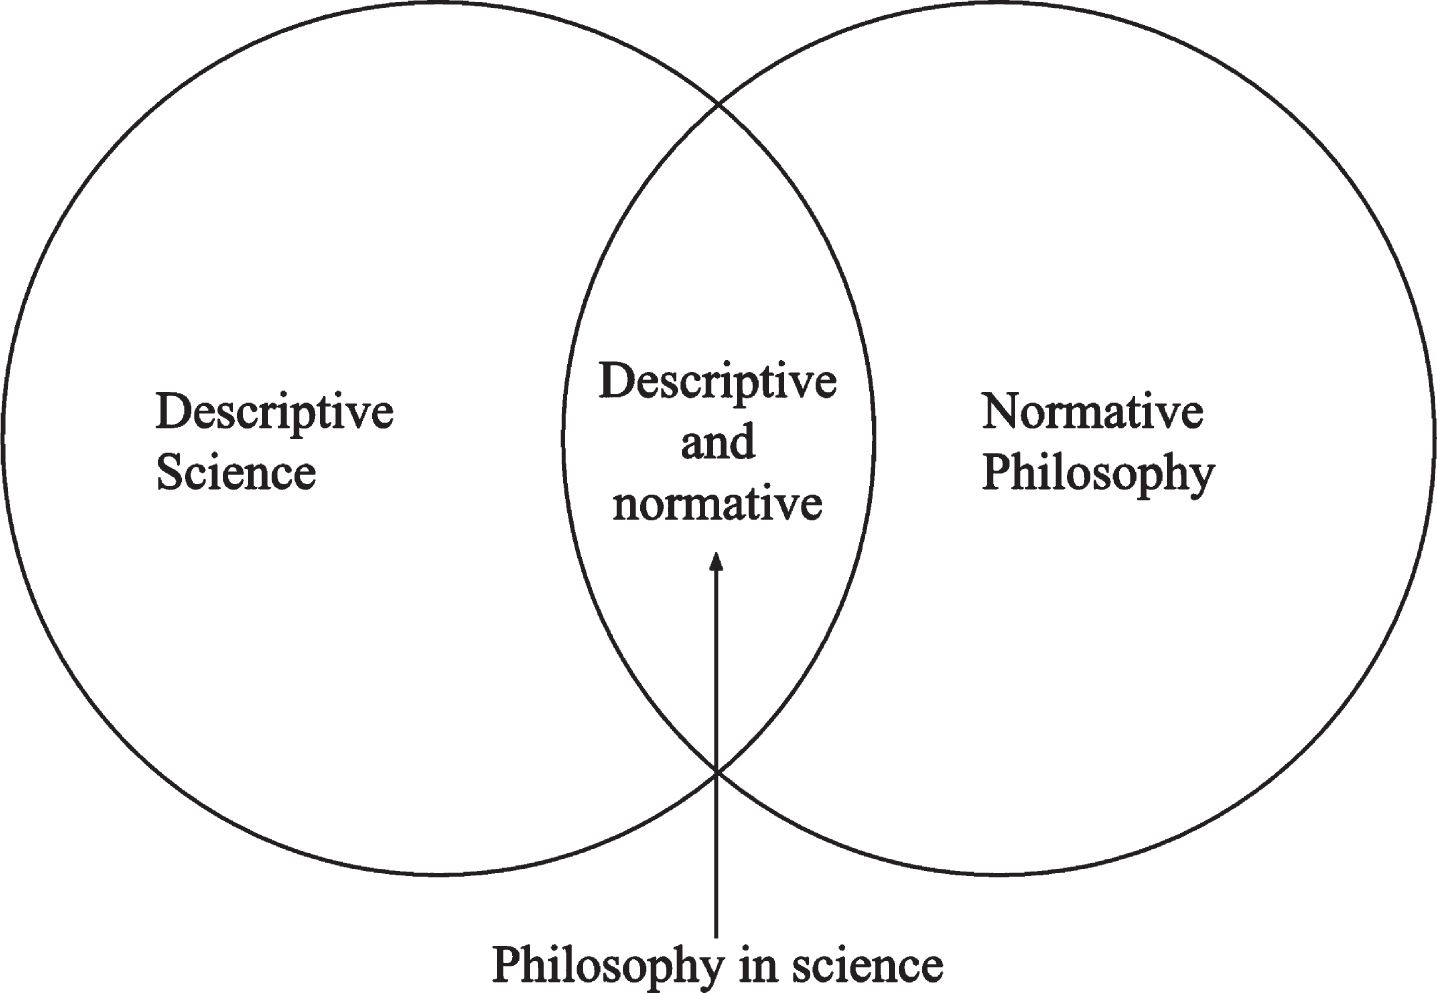 The Journal of Alzheimer’s Disease as a forum for philosophy in science between descriptive science on one hand, and normative philosophy on the other. While empirical science on AD is concerned with describing the condition, much philosophy and ethics related to AD is concerned with how clinicians and researchers should act and is “normative,” because it appeals to norms to assess actions. Philosophy in science uses a mix of descriptive and normative methods to tackle issues relevant to, as well as emerging from, scientific practice.